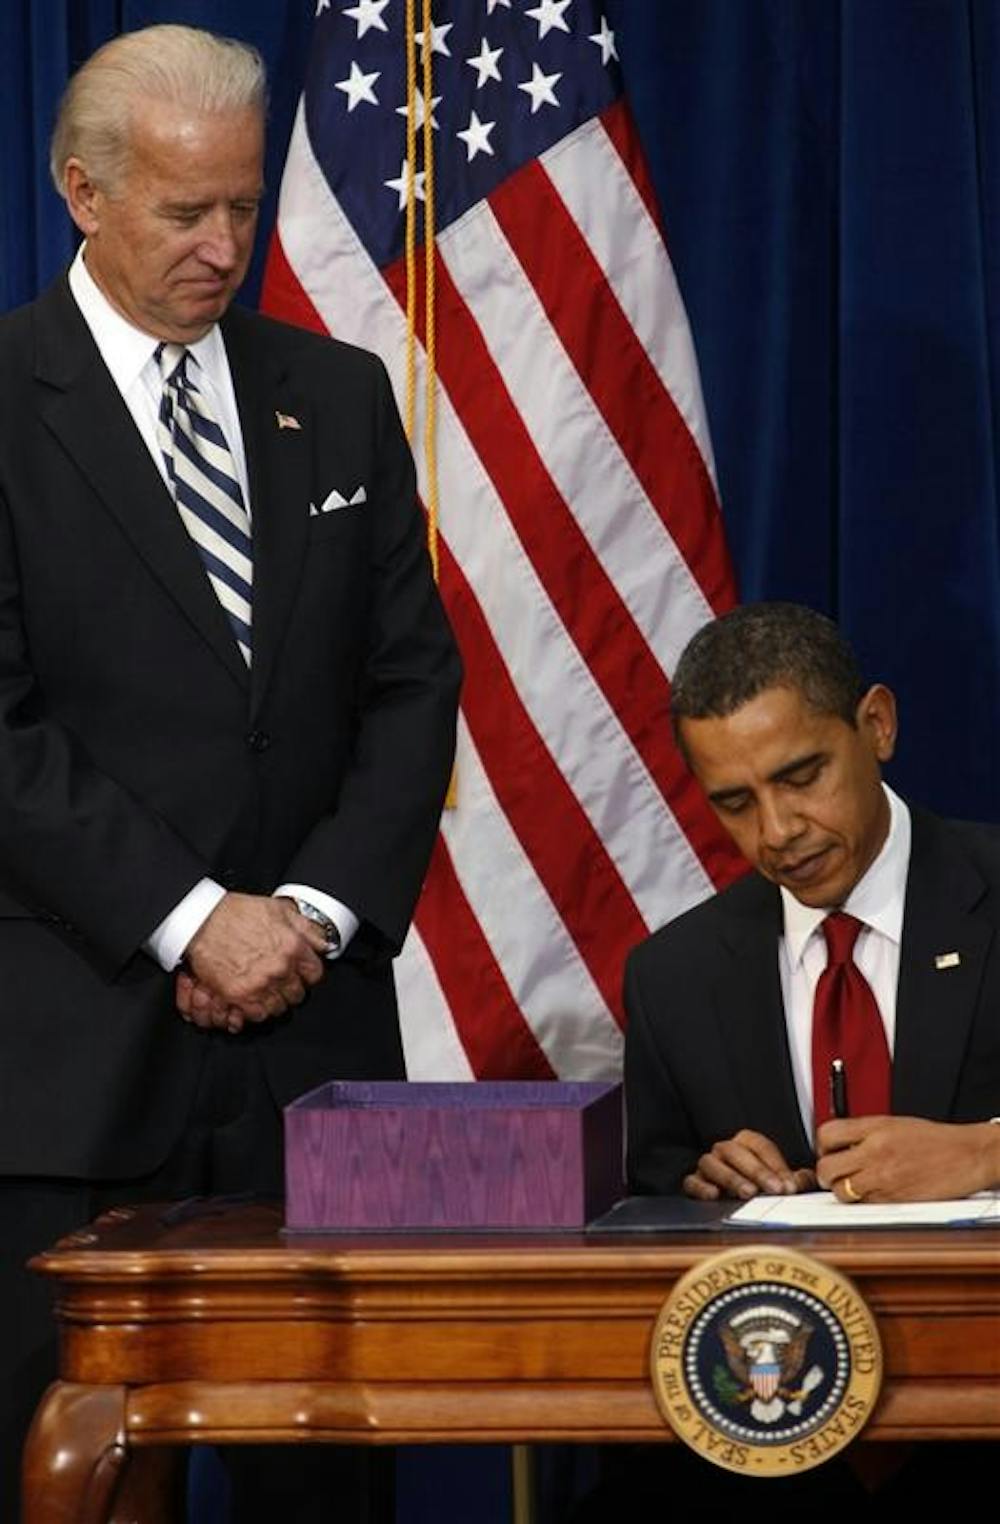 With Vice President Joe Biden looking on, President Barack Obama signs the economic stimulus bill during a ceremony on Tuesday in the Museum of Nature and Science in Denver.